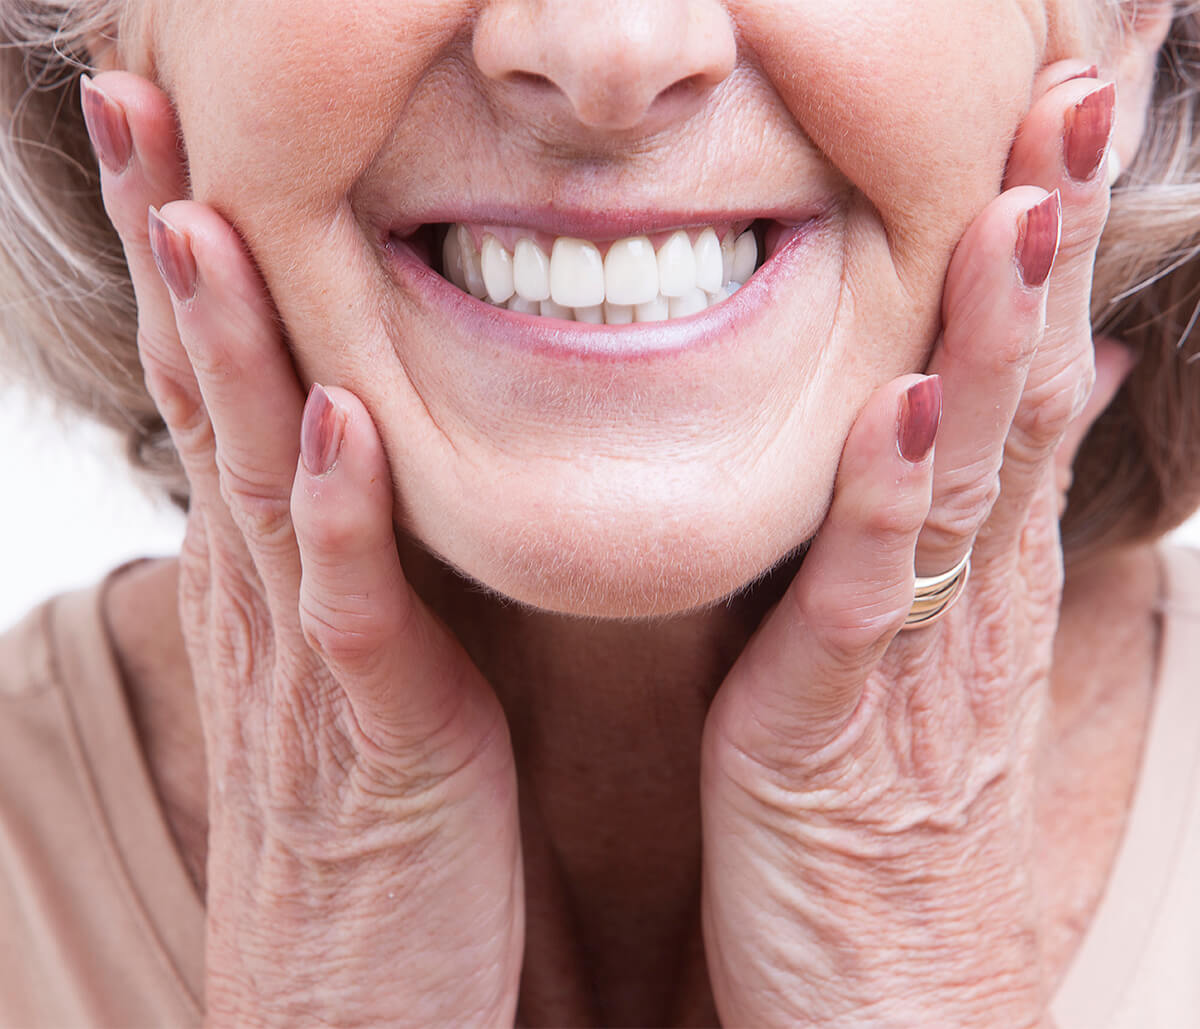 Custom Made Dentures in Knoxville TN Area